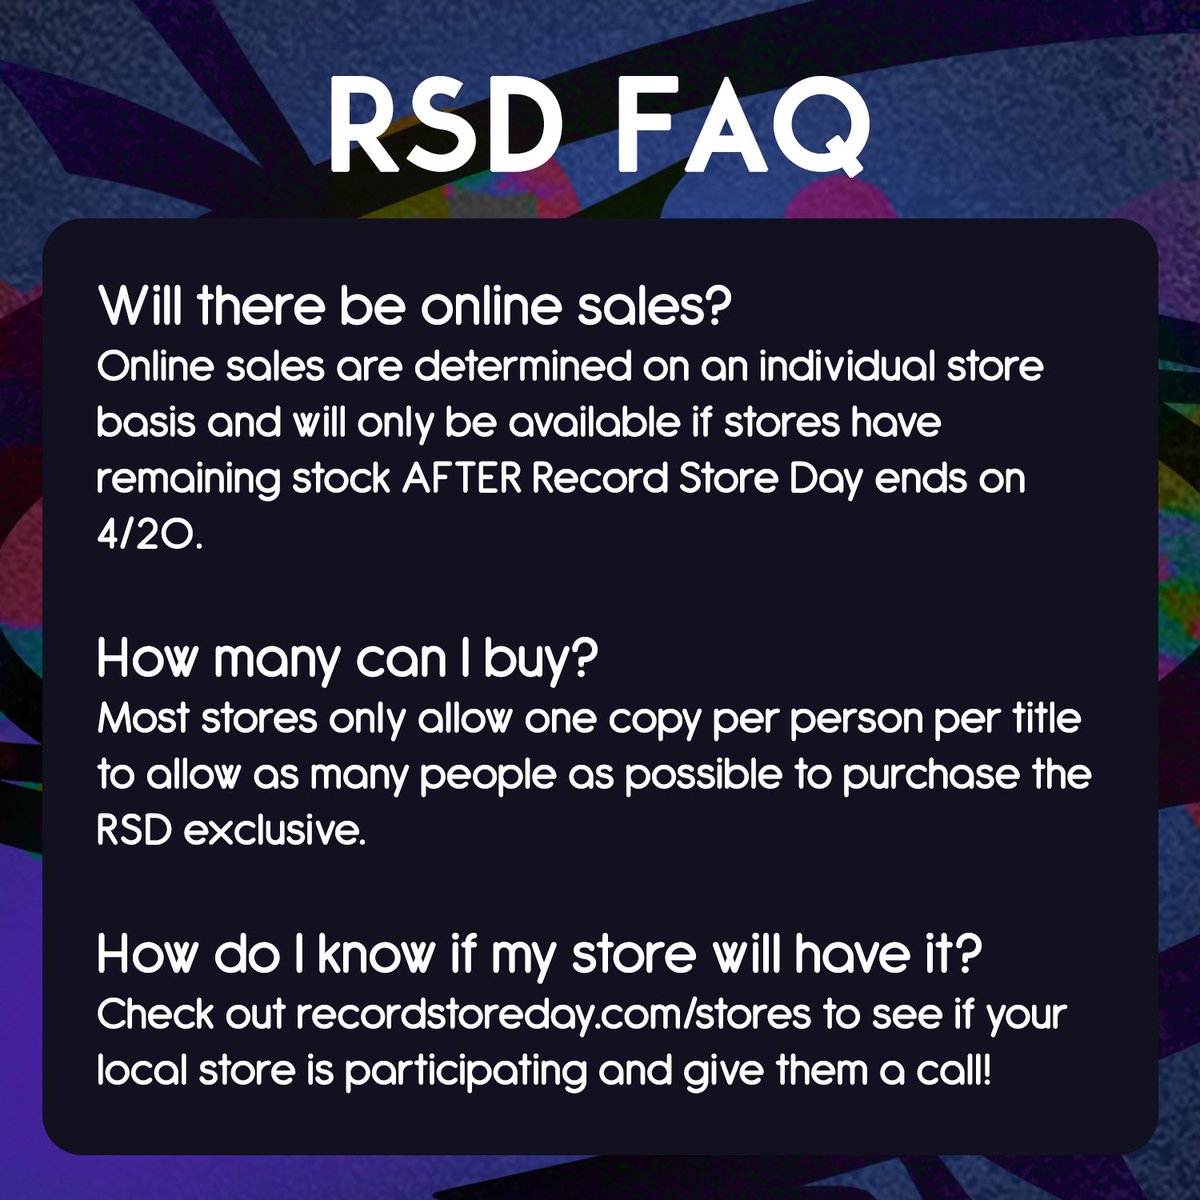 HEY ATINY! Here’s what you need to know about Record Store Day! 🎶

Check recordstoreday.com/stores to see if your local record store is participating!

#RSD2024 #RSD24 #Recordstoreday2024 #RSD_KpopArtistOfTheYear_ATEEZ #ATEEZ